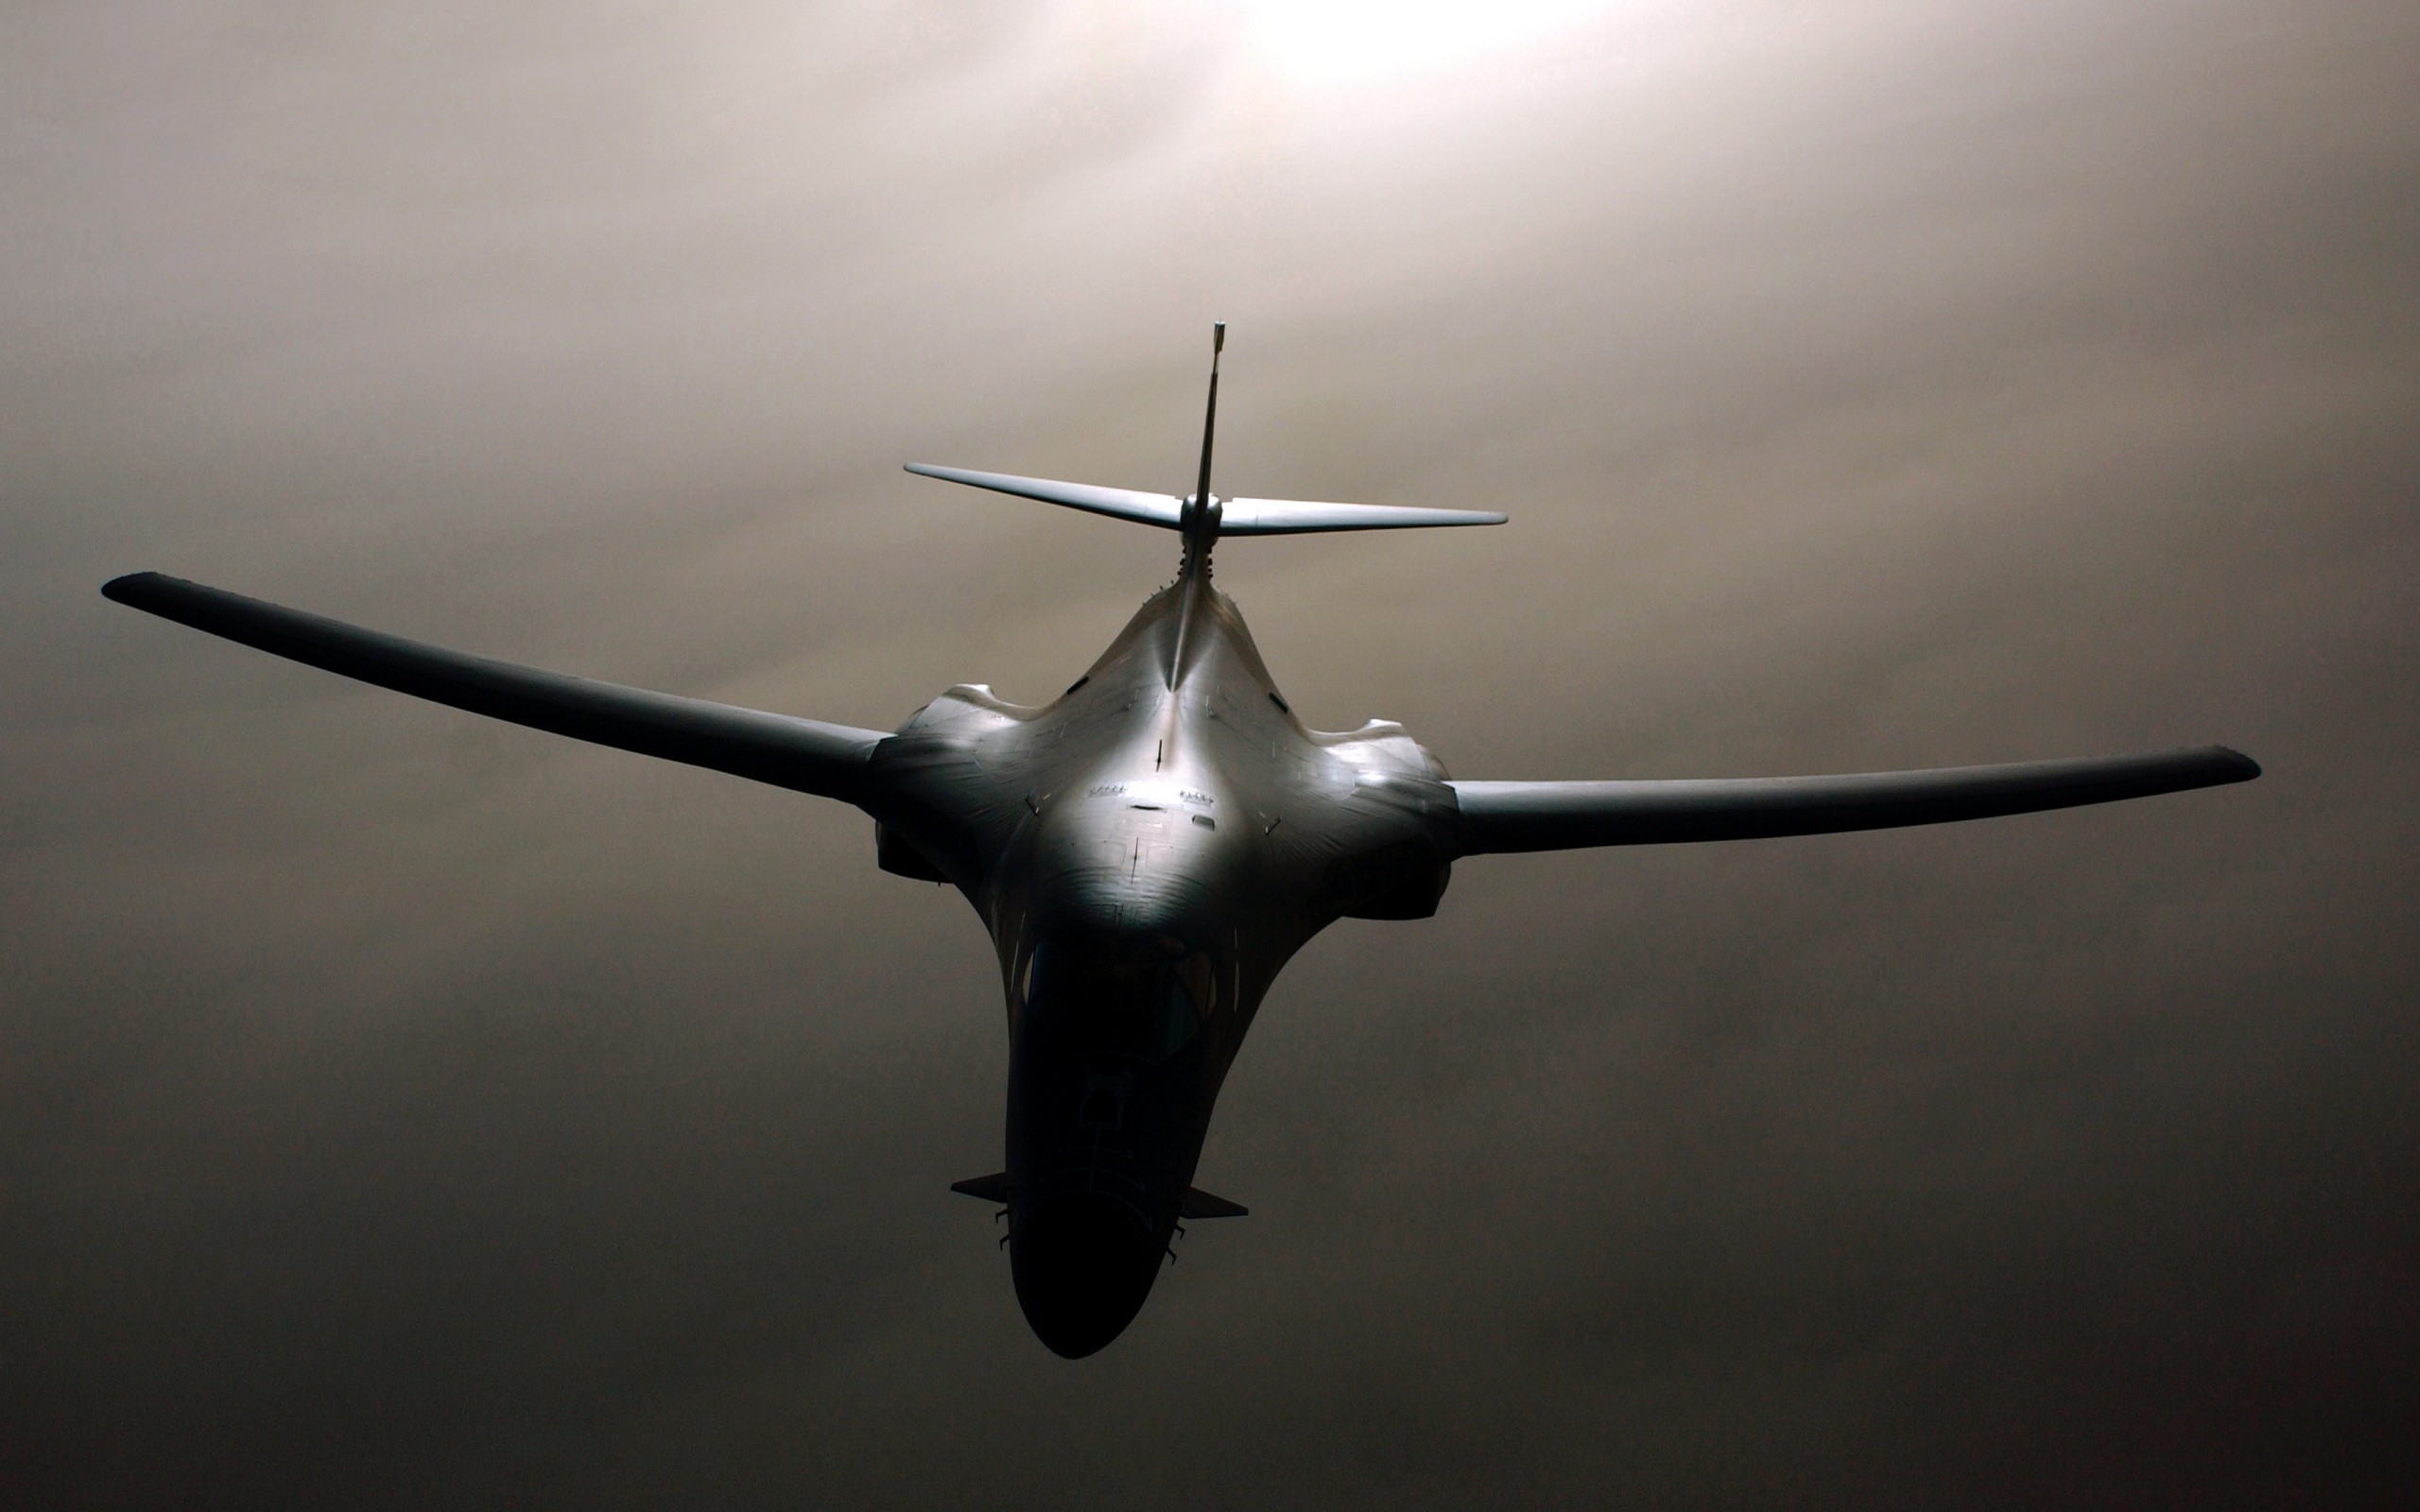 General 2560x1600 military military aircraft vehicle military vehicle Bomber American aircraft strategic bomber aircraft frontal view US Air Force Military UAV minimalism Rockwell B-1 Lancer sky airplane